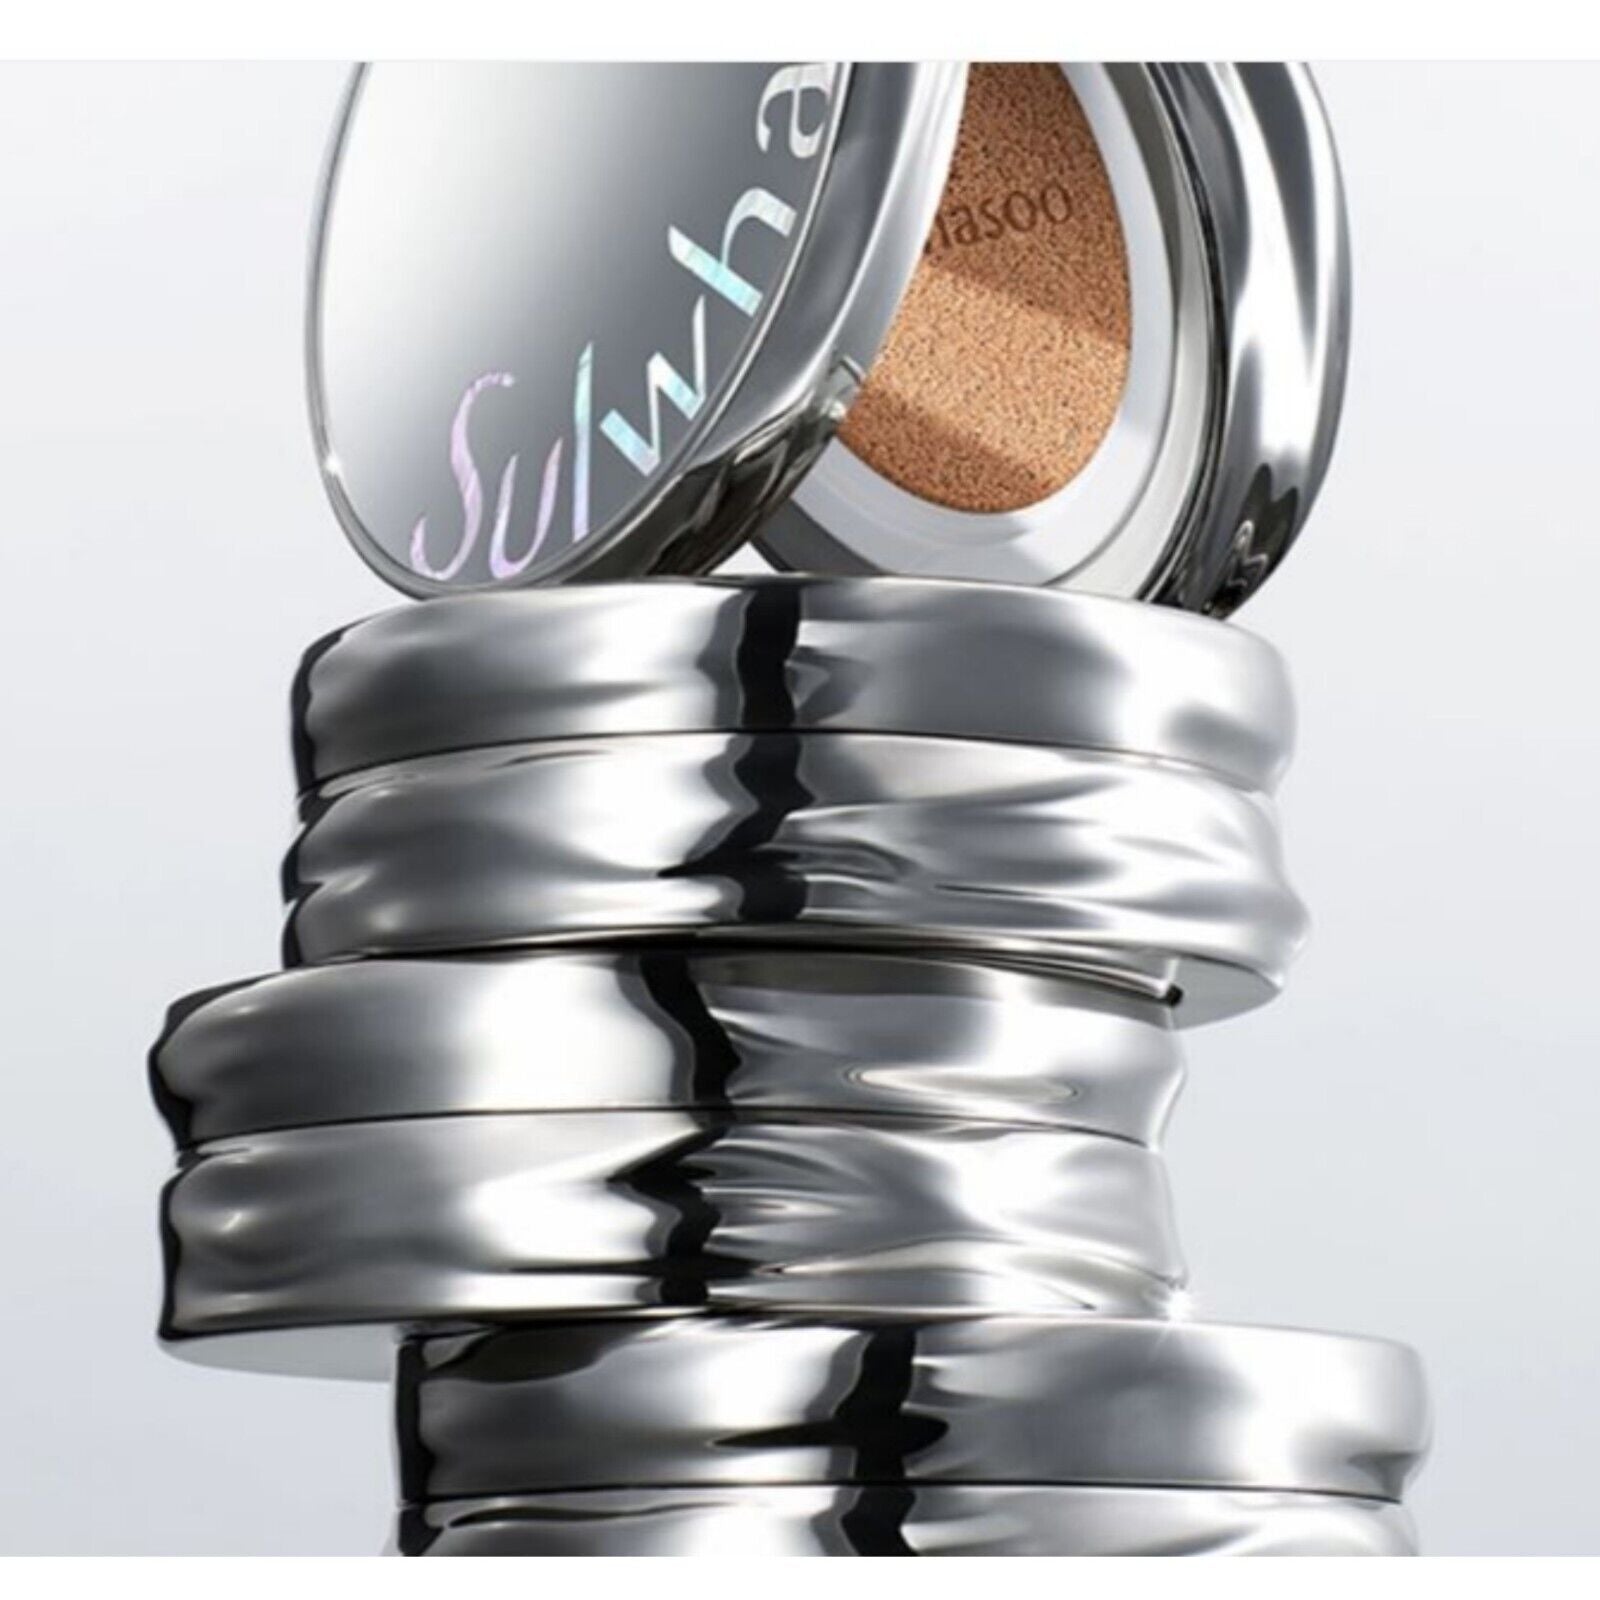 Compact powder by Sulwhasoo Perfecting Cushion Airy, 15g (Original + Refill), for a flawless and lightweight finish.